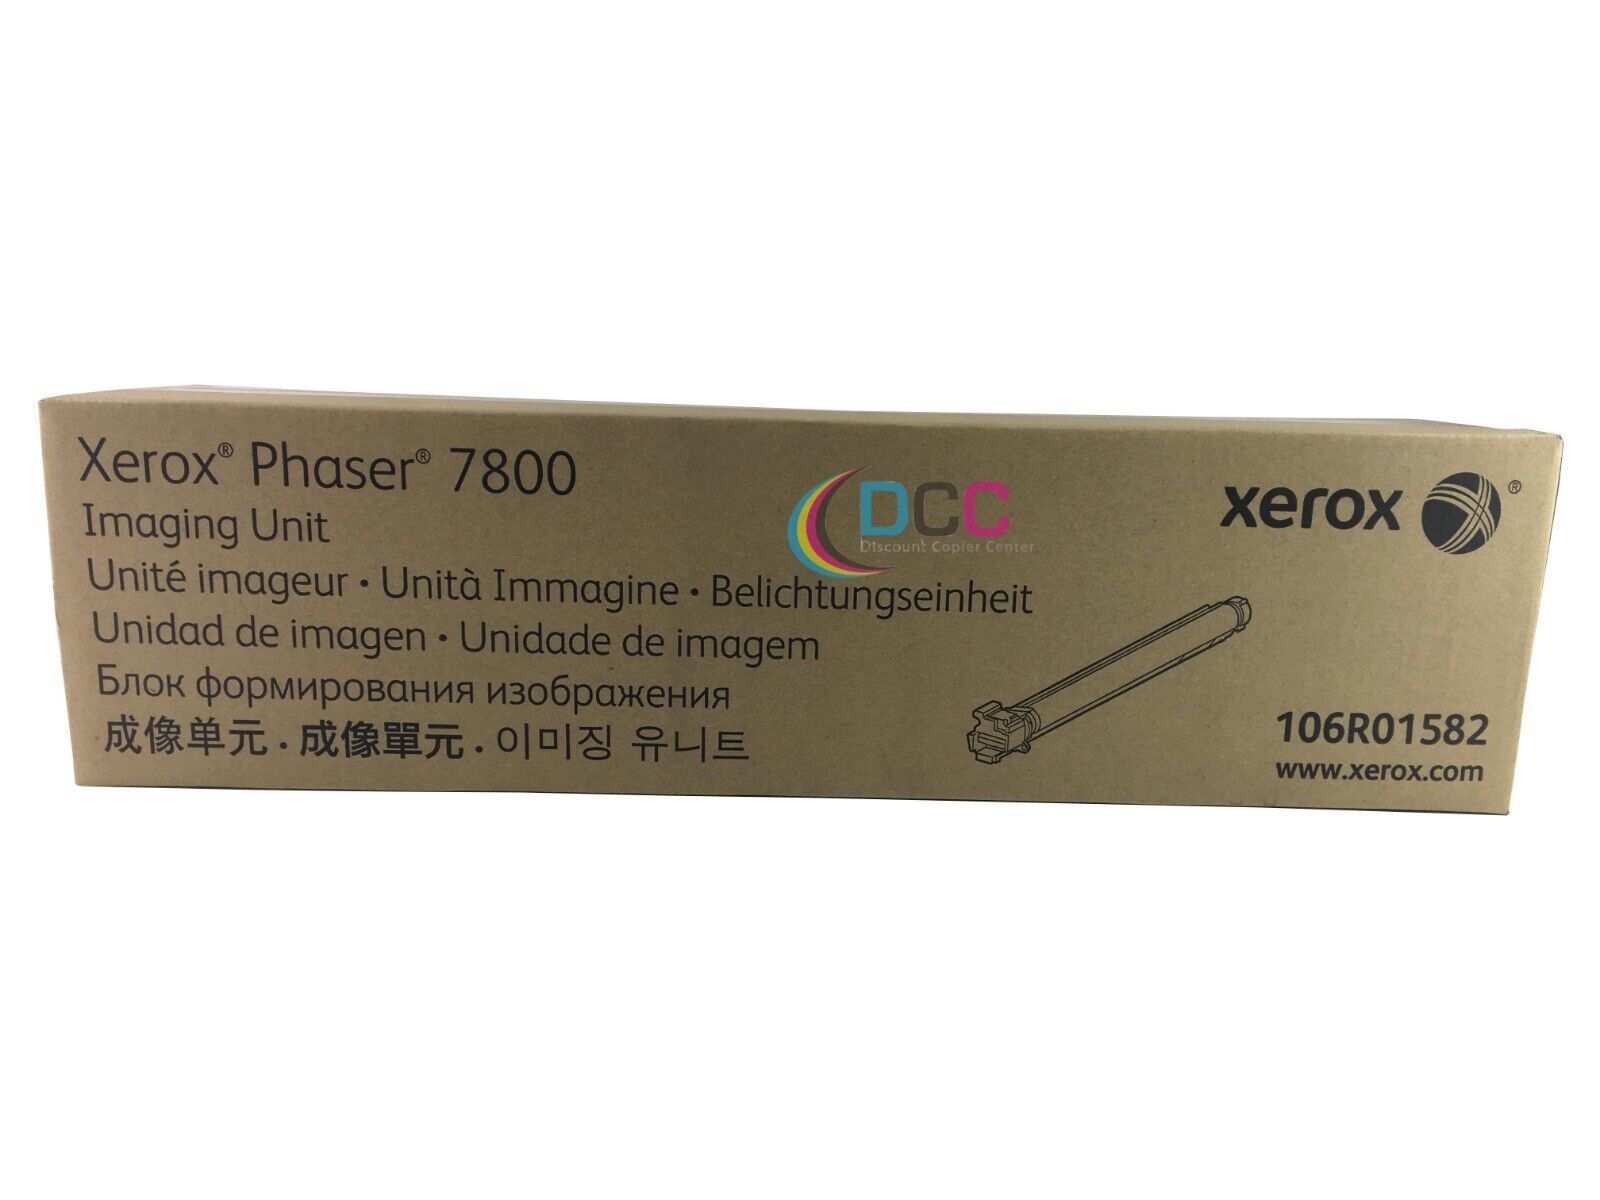 New & Genuine Xerox 106R01582 Phaser 7800 Imaging Unit 106R1582 - Phase 7800DN